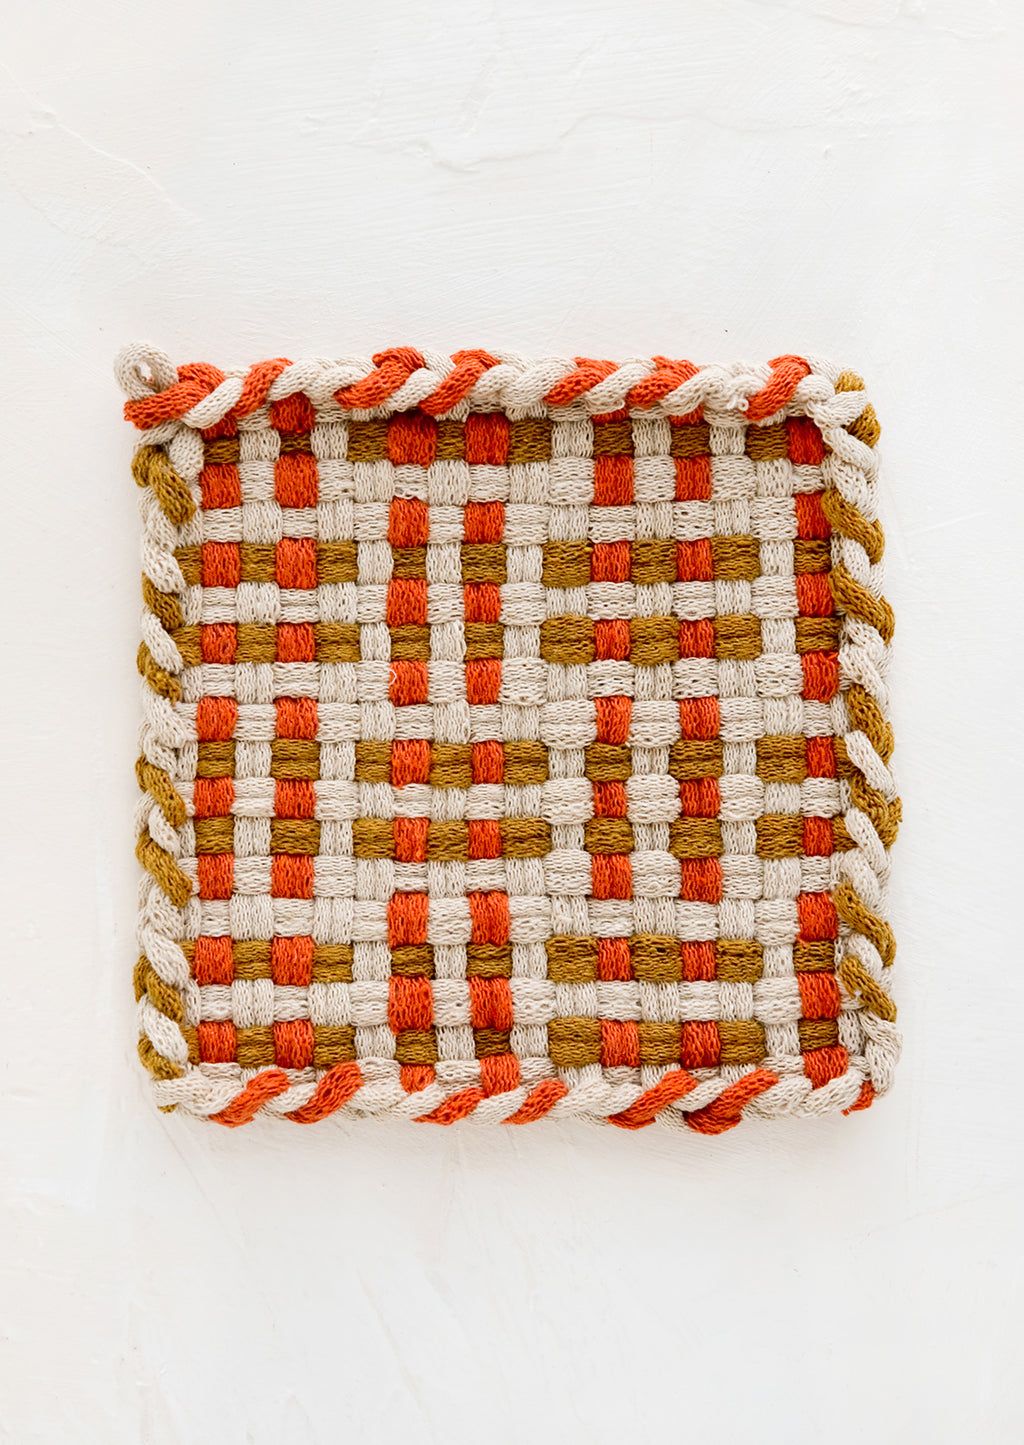 Brick / Ochre / Tan: A hand-knit potholder in spice red and ochre woven pattern.